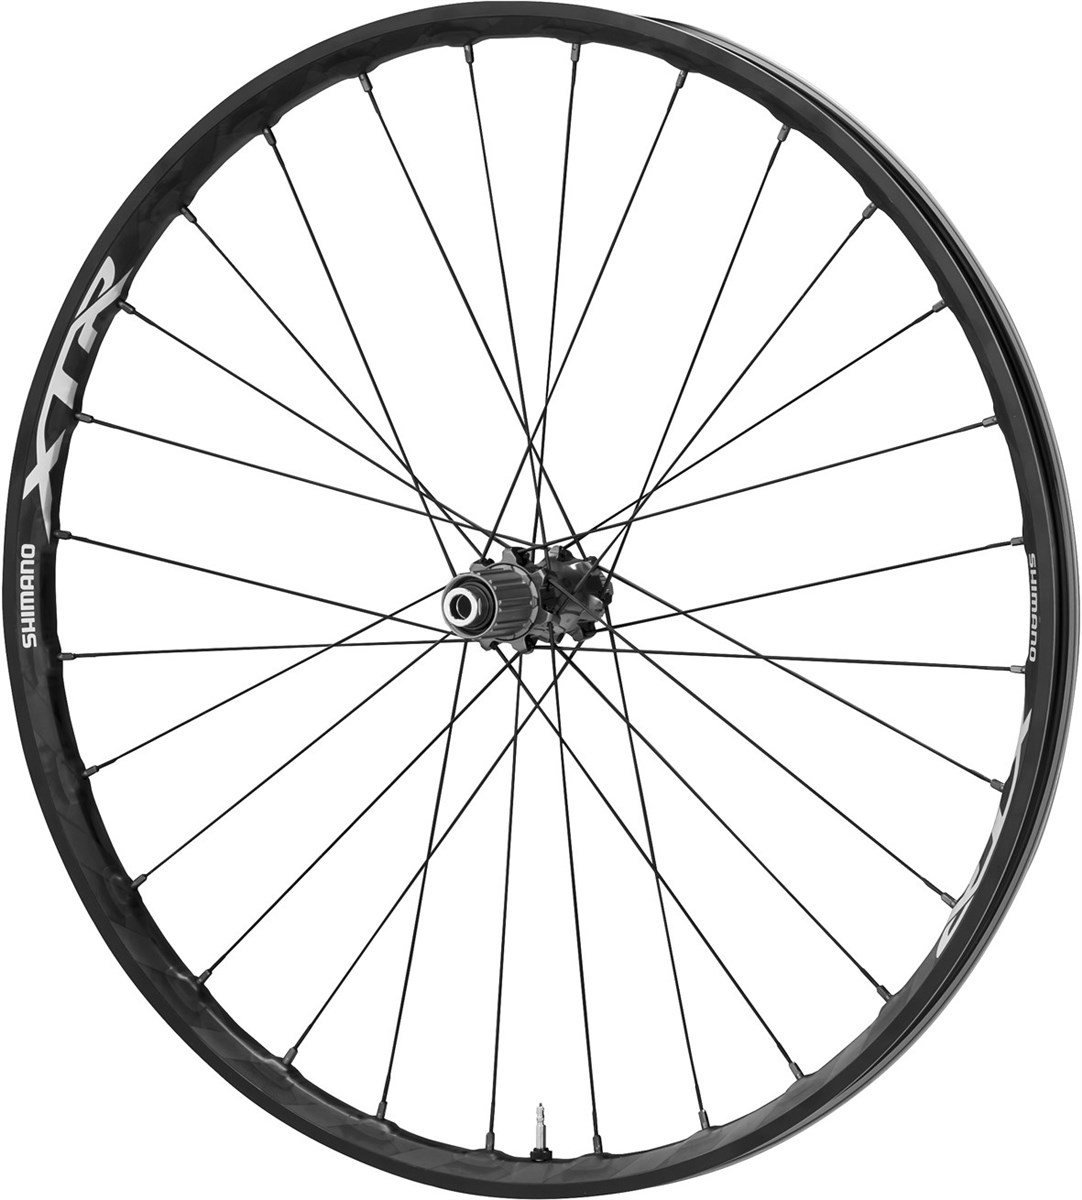 Shimano WH-M9000-TL XC Wheel - 12 x 142 mm Axle - 29er Carbon Clincher - Rear product image